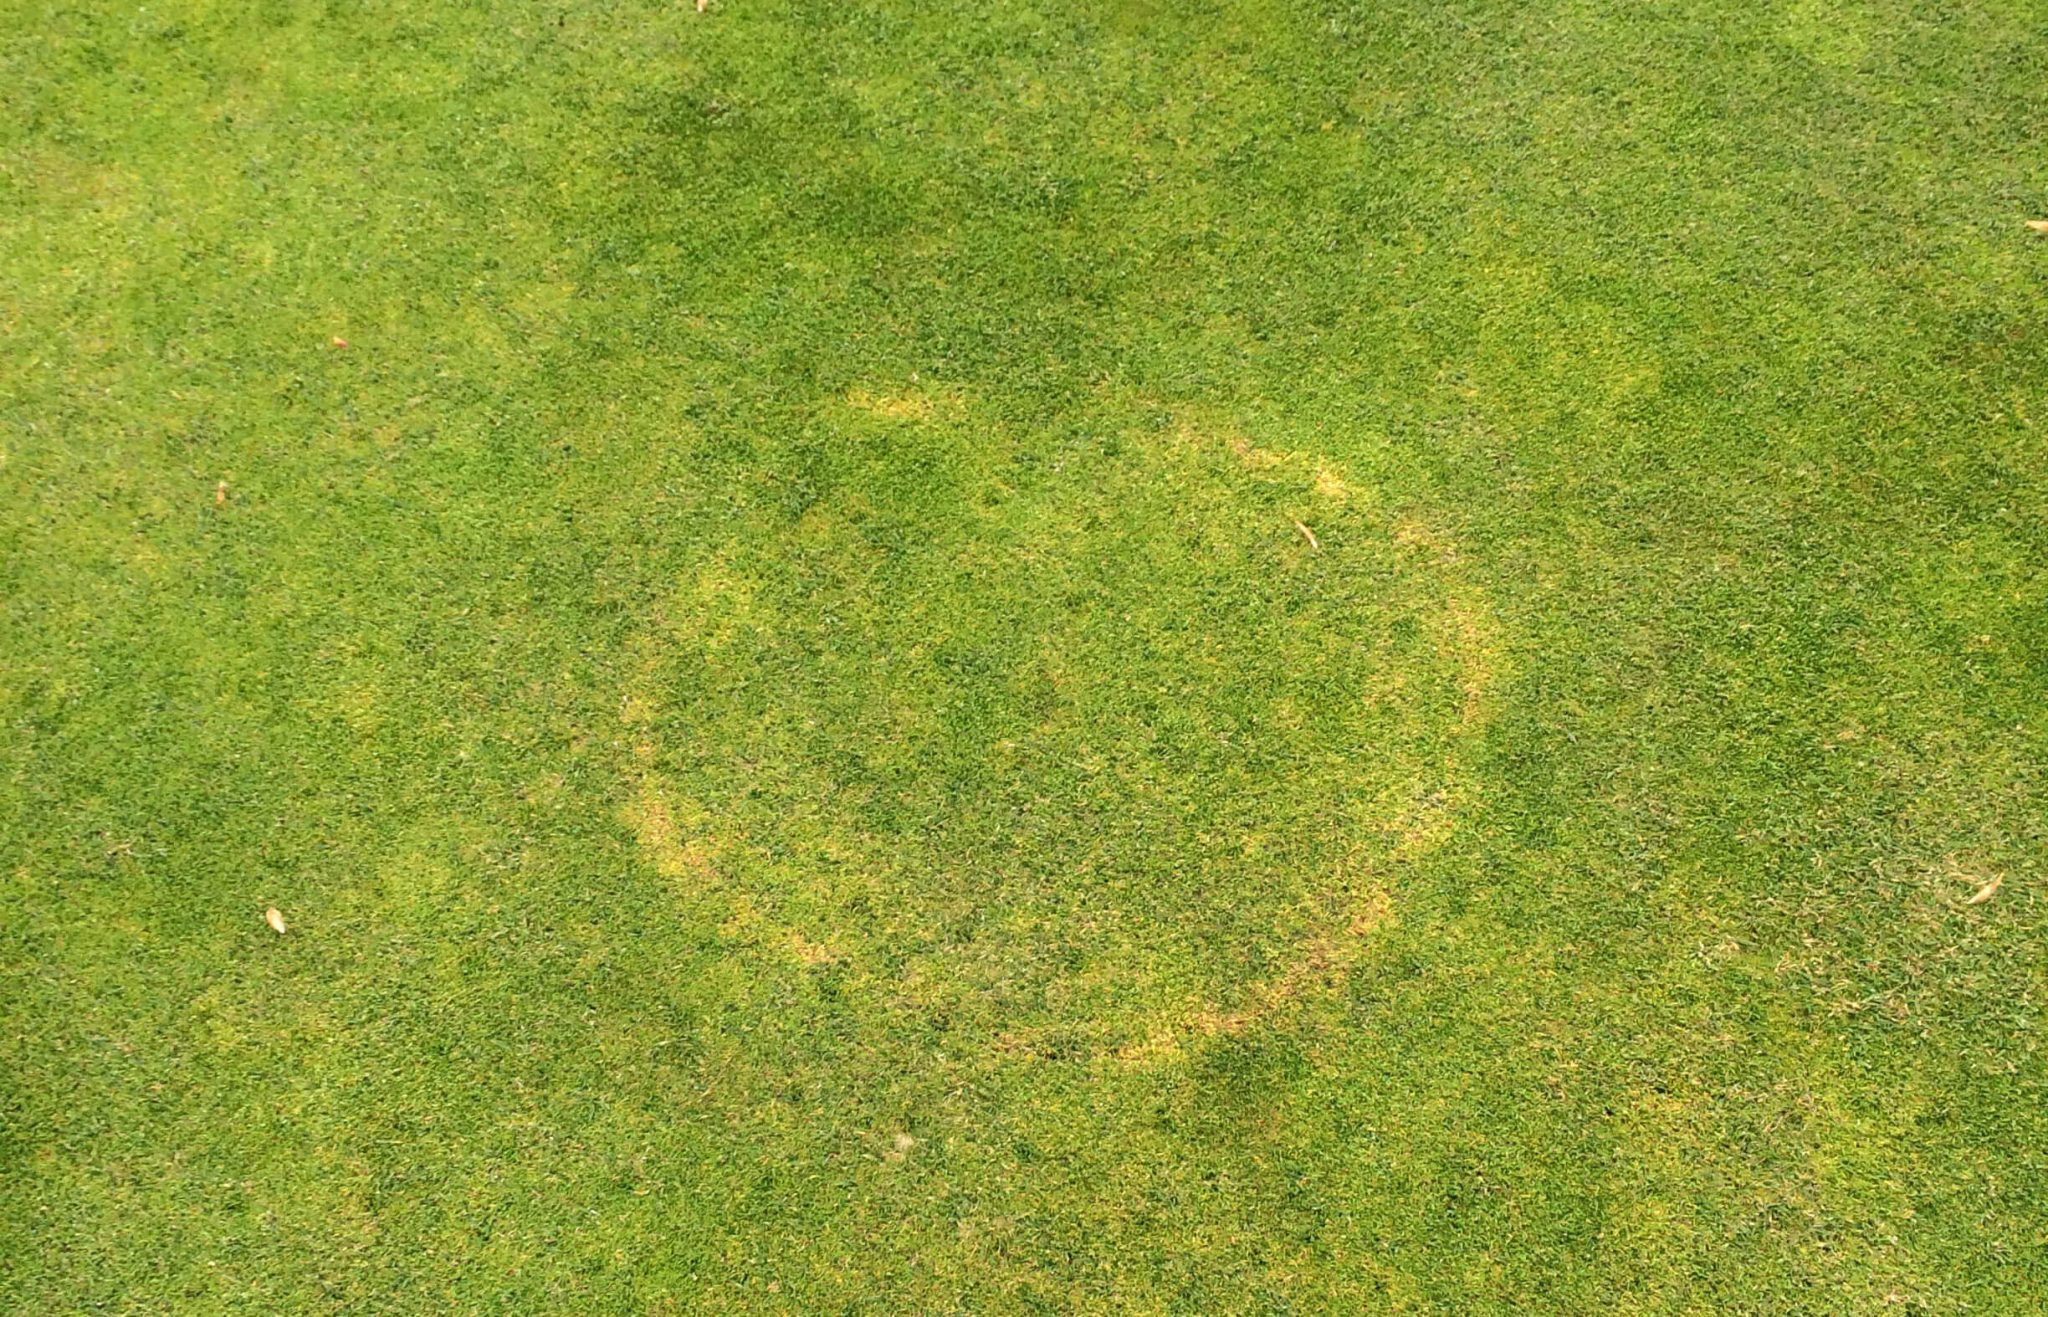 Brown Ring Patch on field